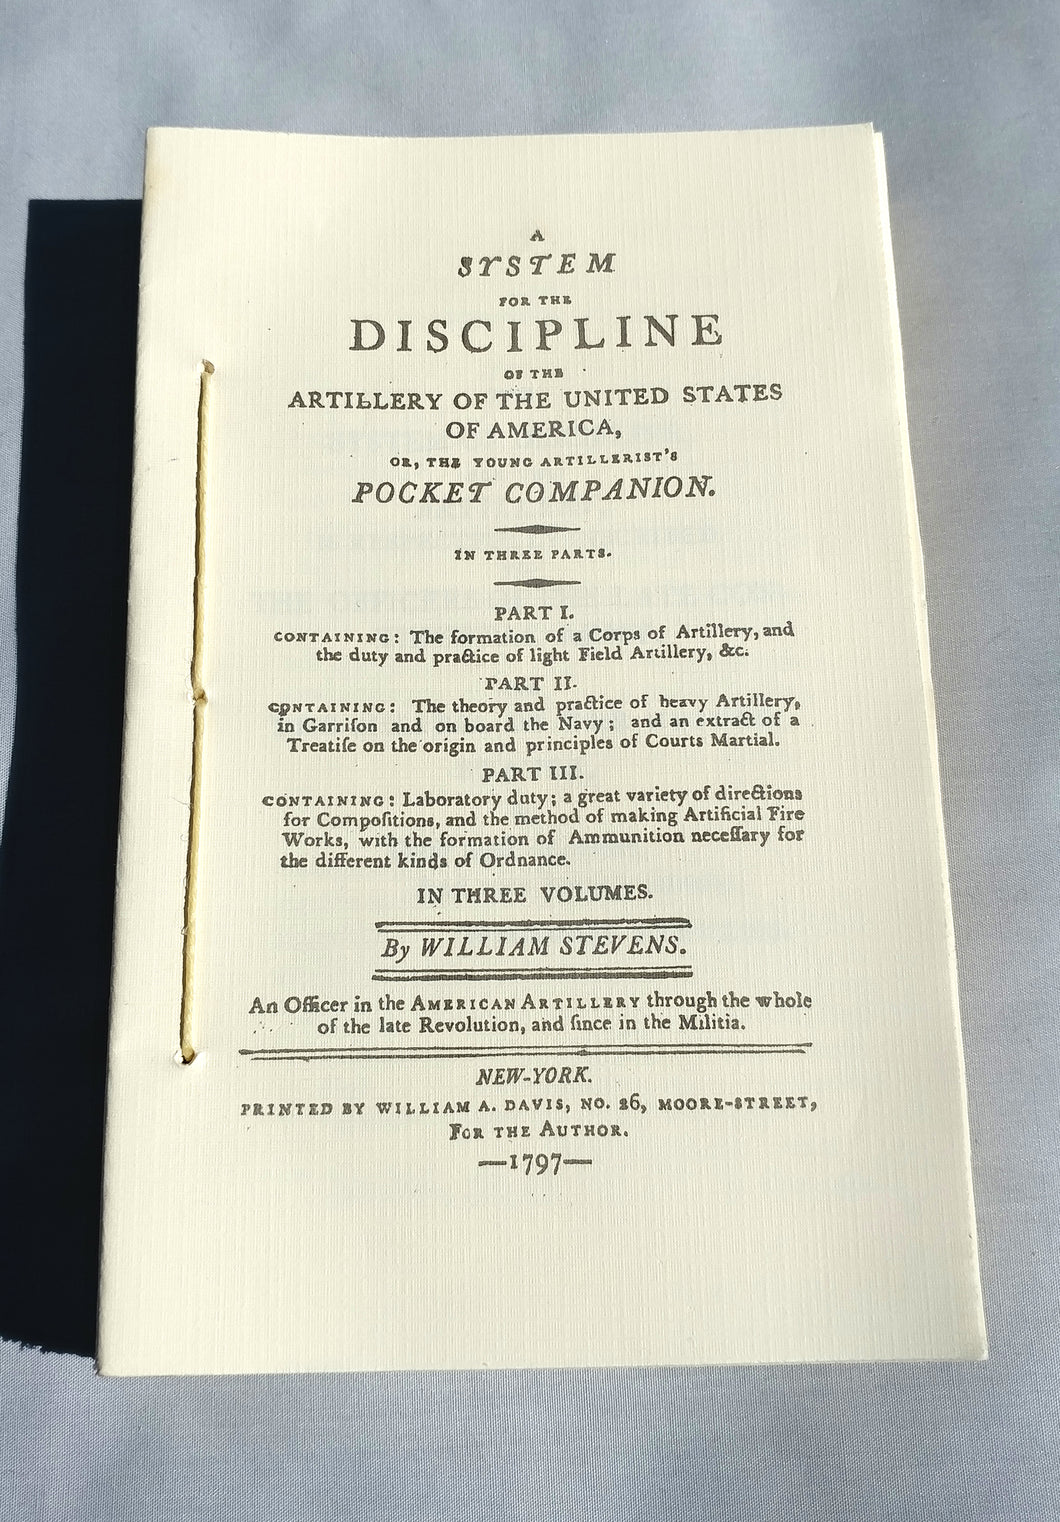 A system for the discipline of the artillery of the United States of America